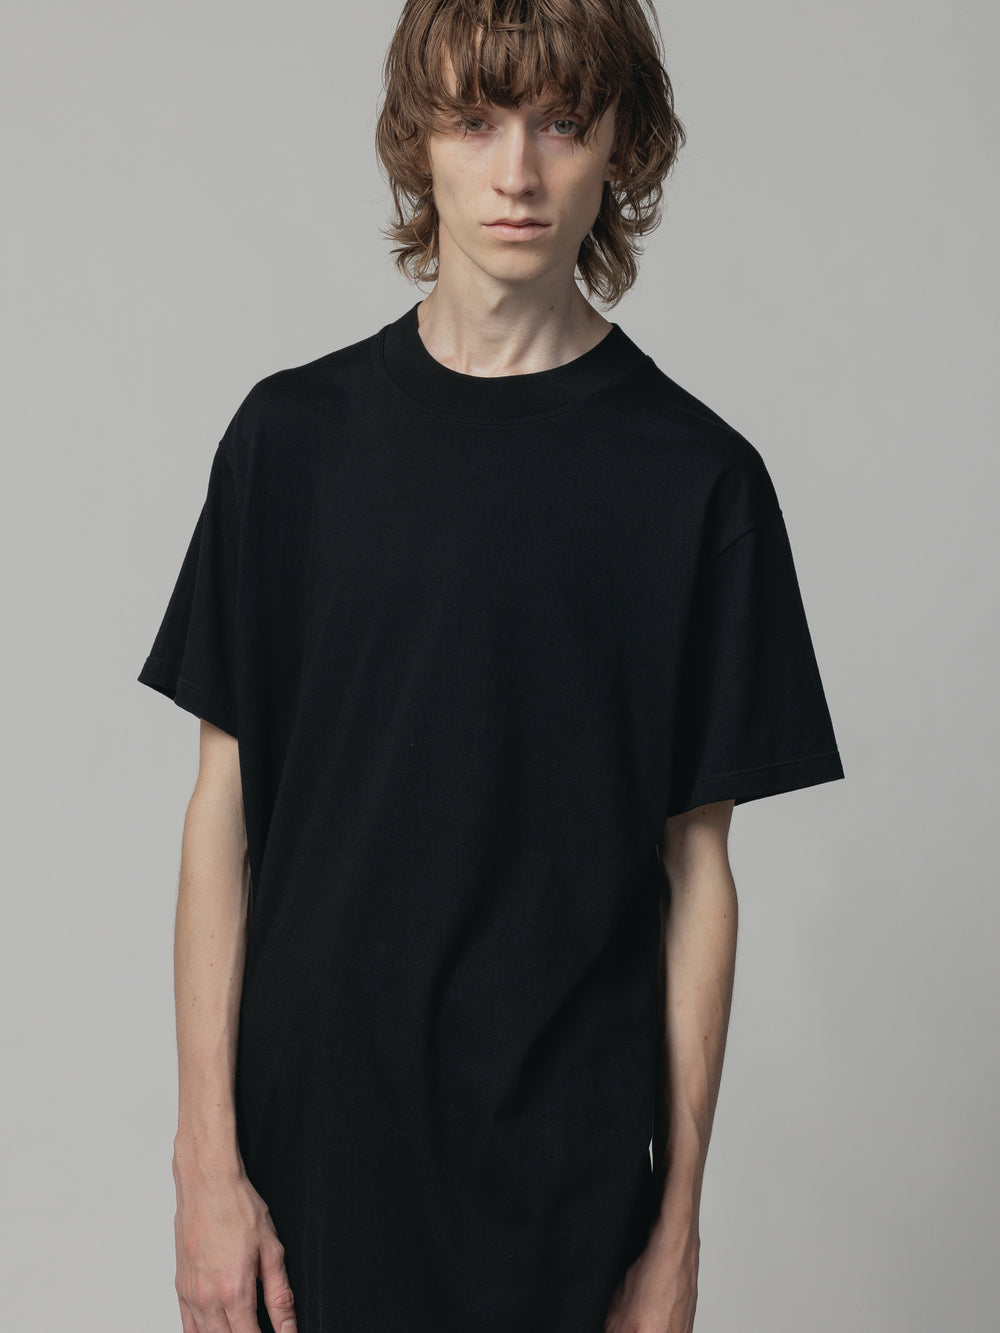 THE VIRIDI-ANNE（ザ ヴィリディアン） TVA 24SS COTTON JERSEY S/S T 